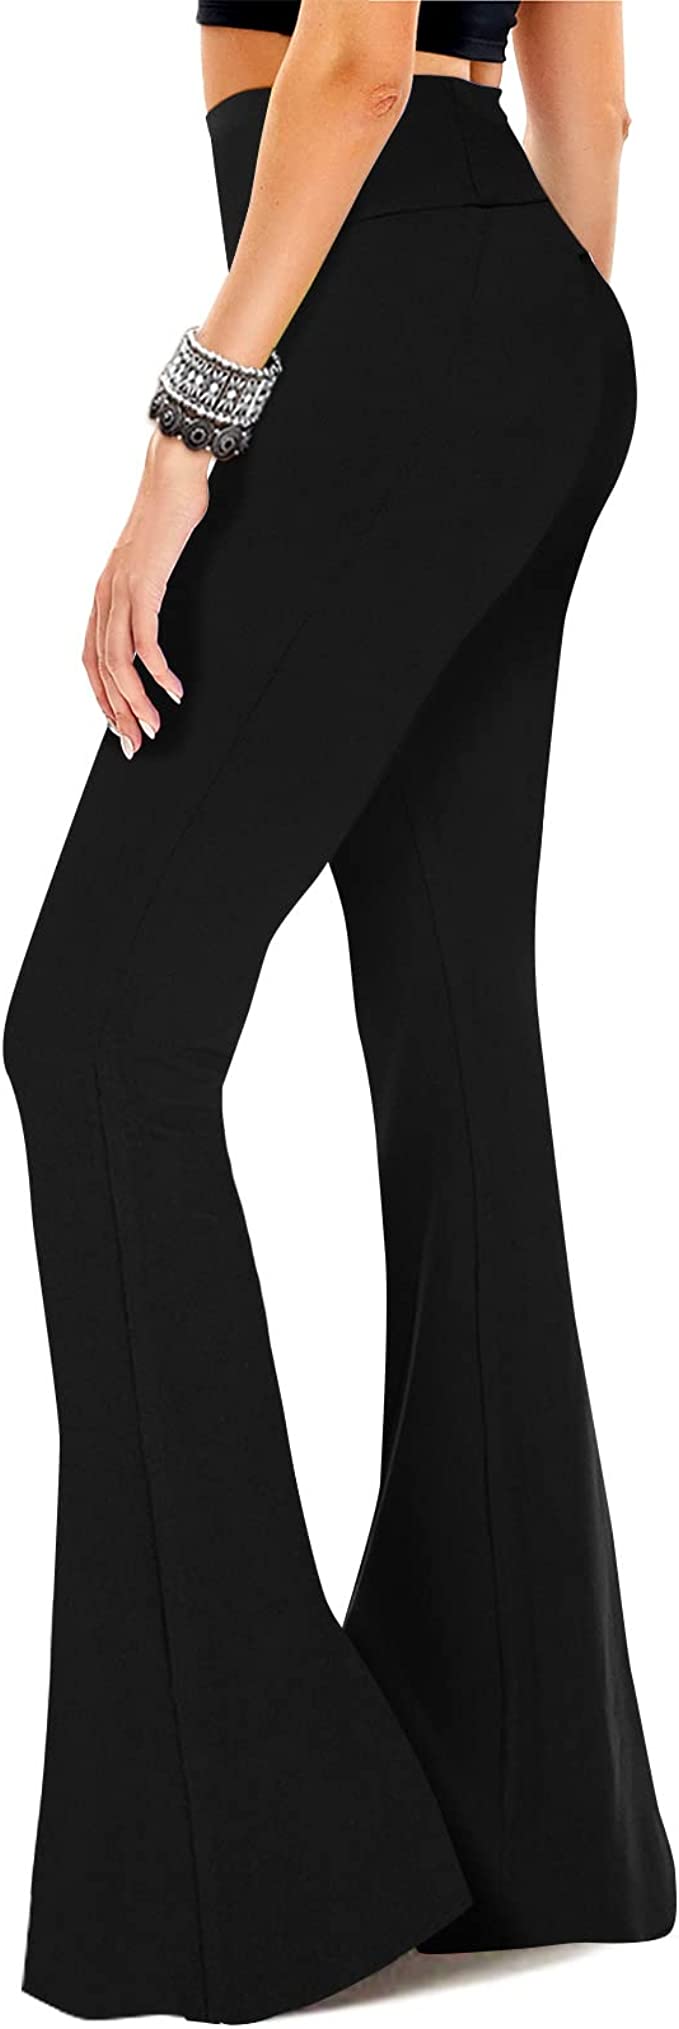 Bluemaple 1 Pack Flare Leggings for Women - High Waisted Buttery Soft Tummy  Control Lounge Palazzo Yoga Pants